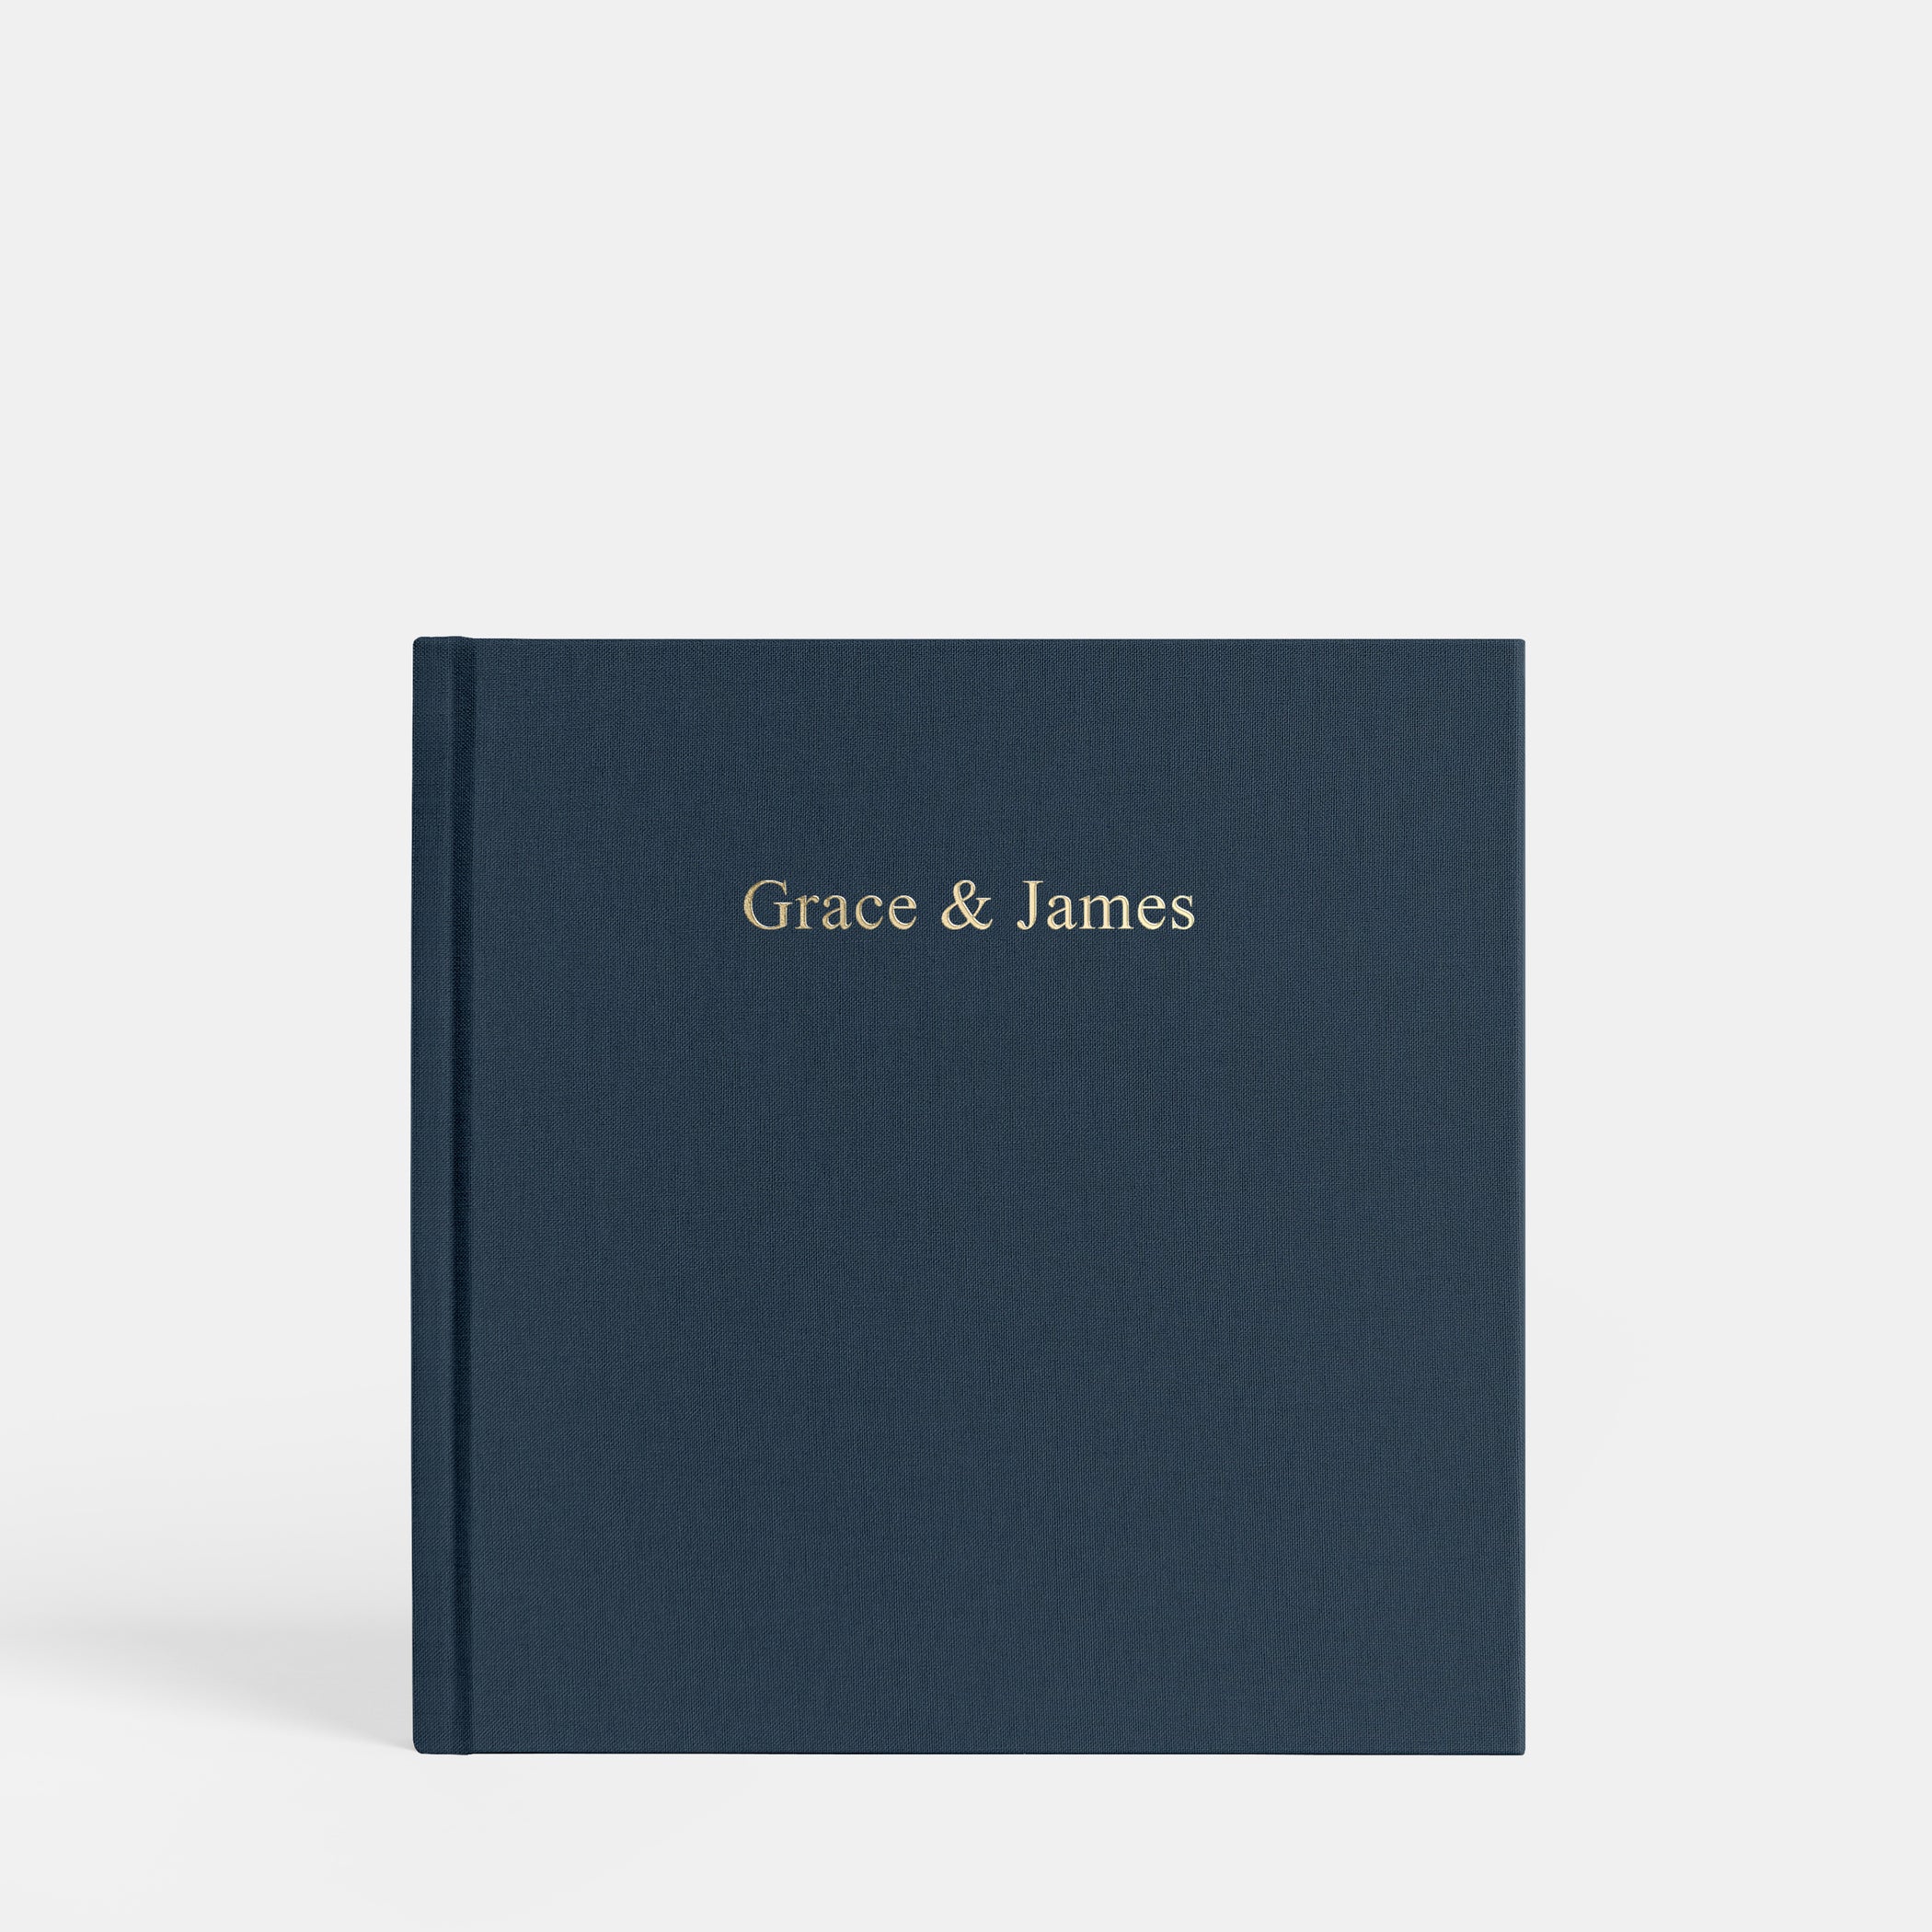 So Glad You're Here -- An All-occasion Guest Book For A Graduation